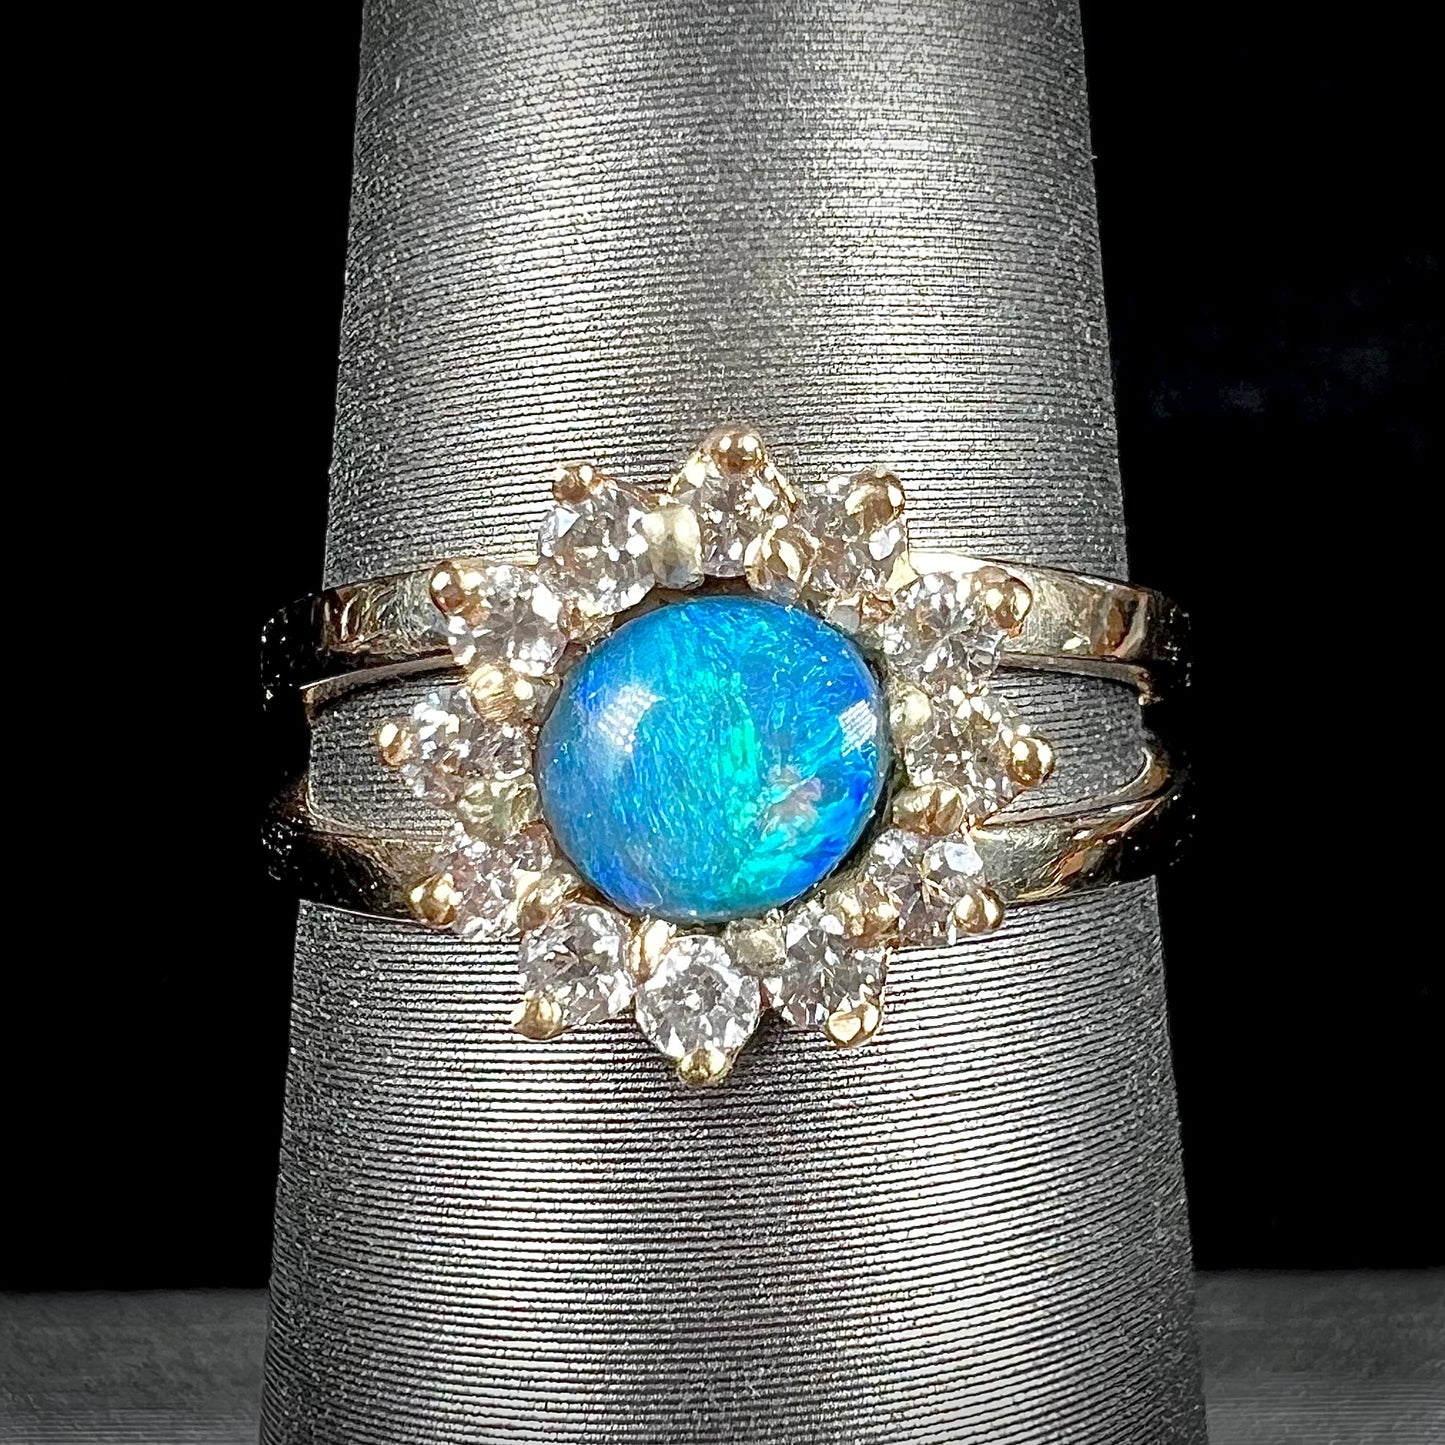 A ladies' round cut black opal and diamond halo ring.  The ring is yellow gold and has a split shank.